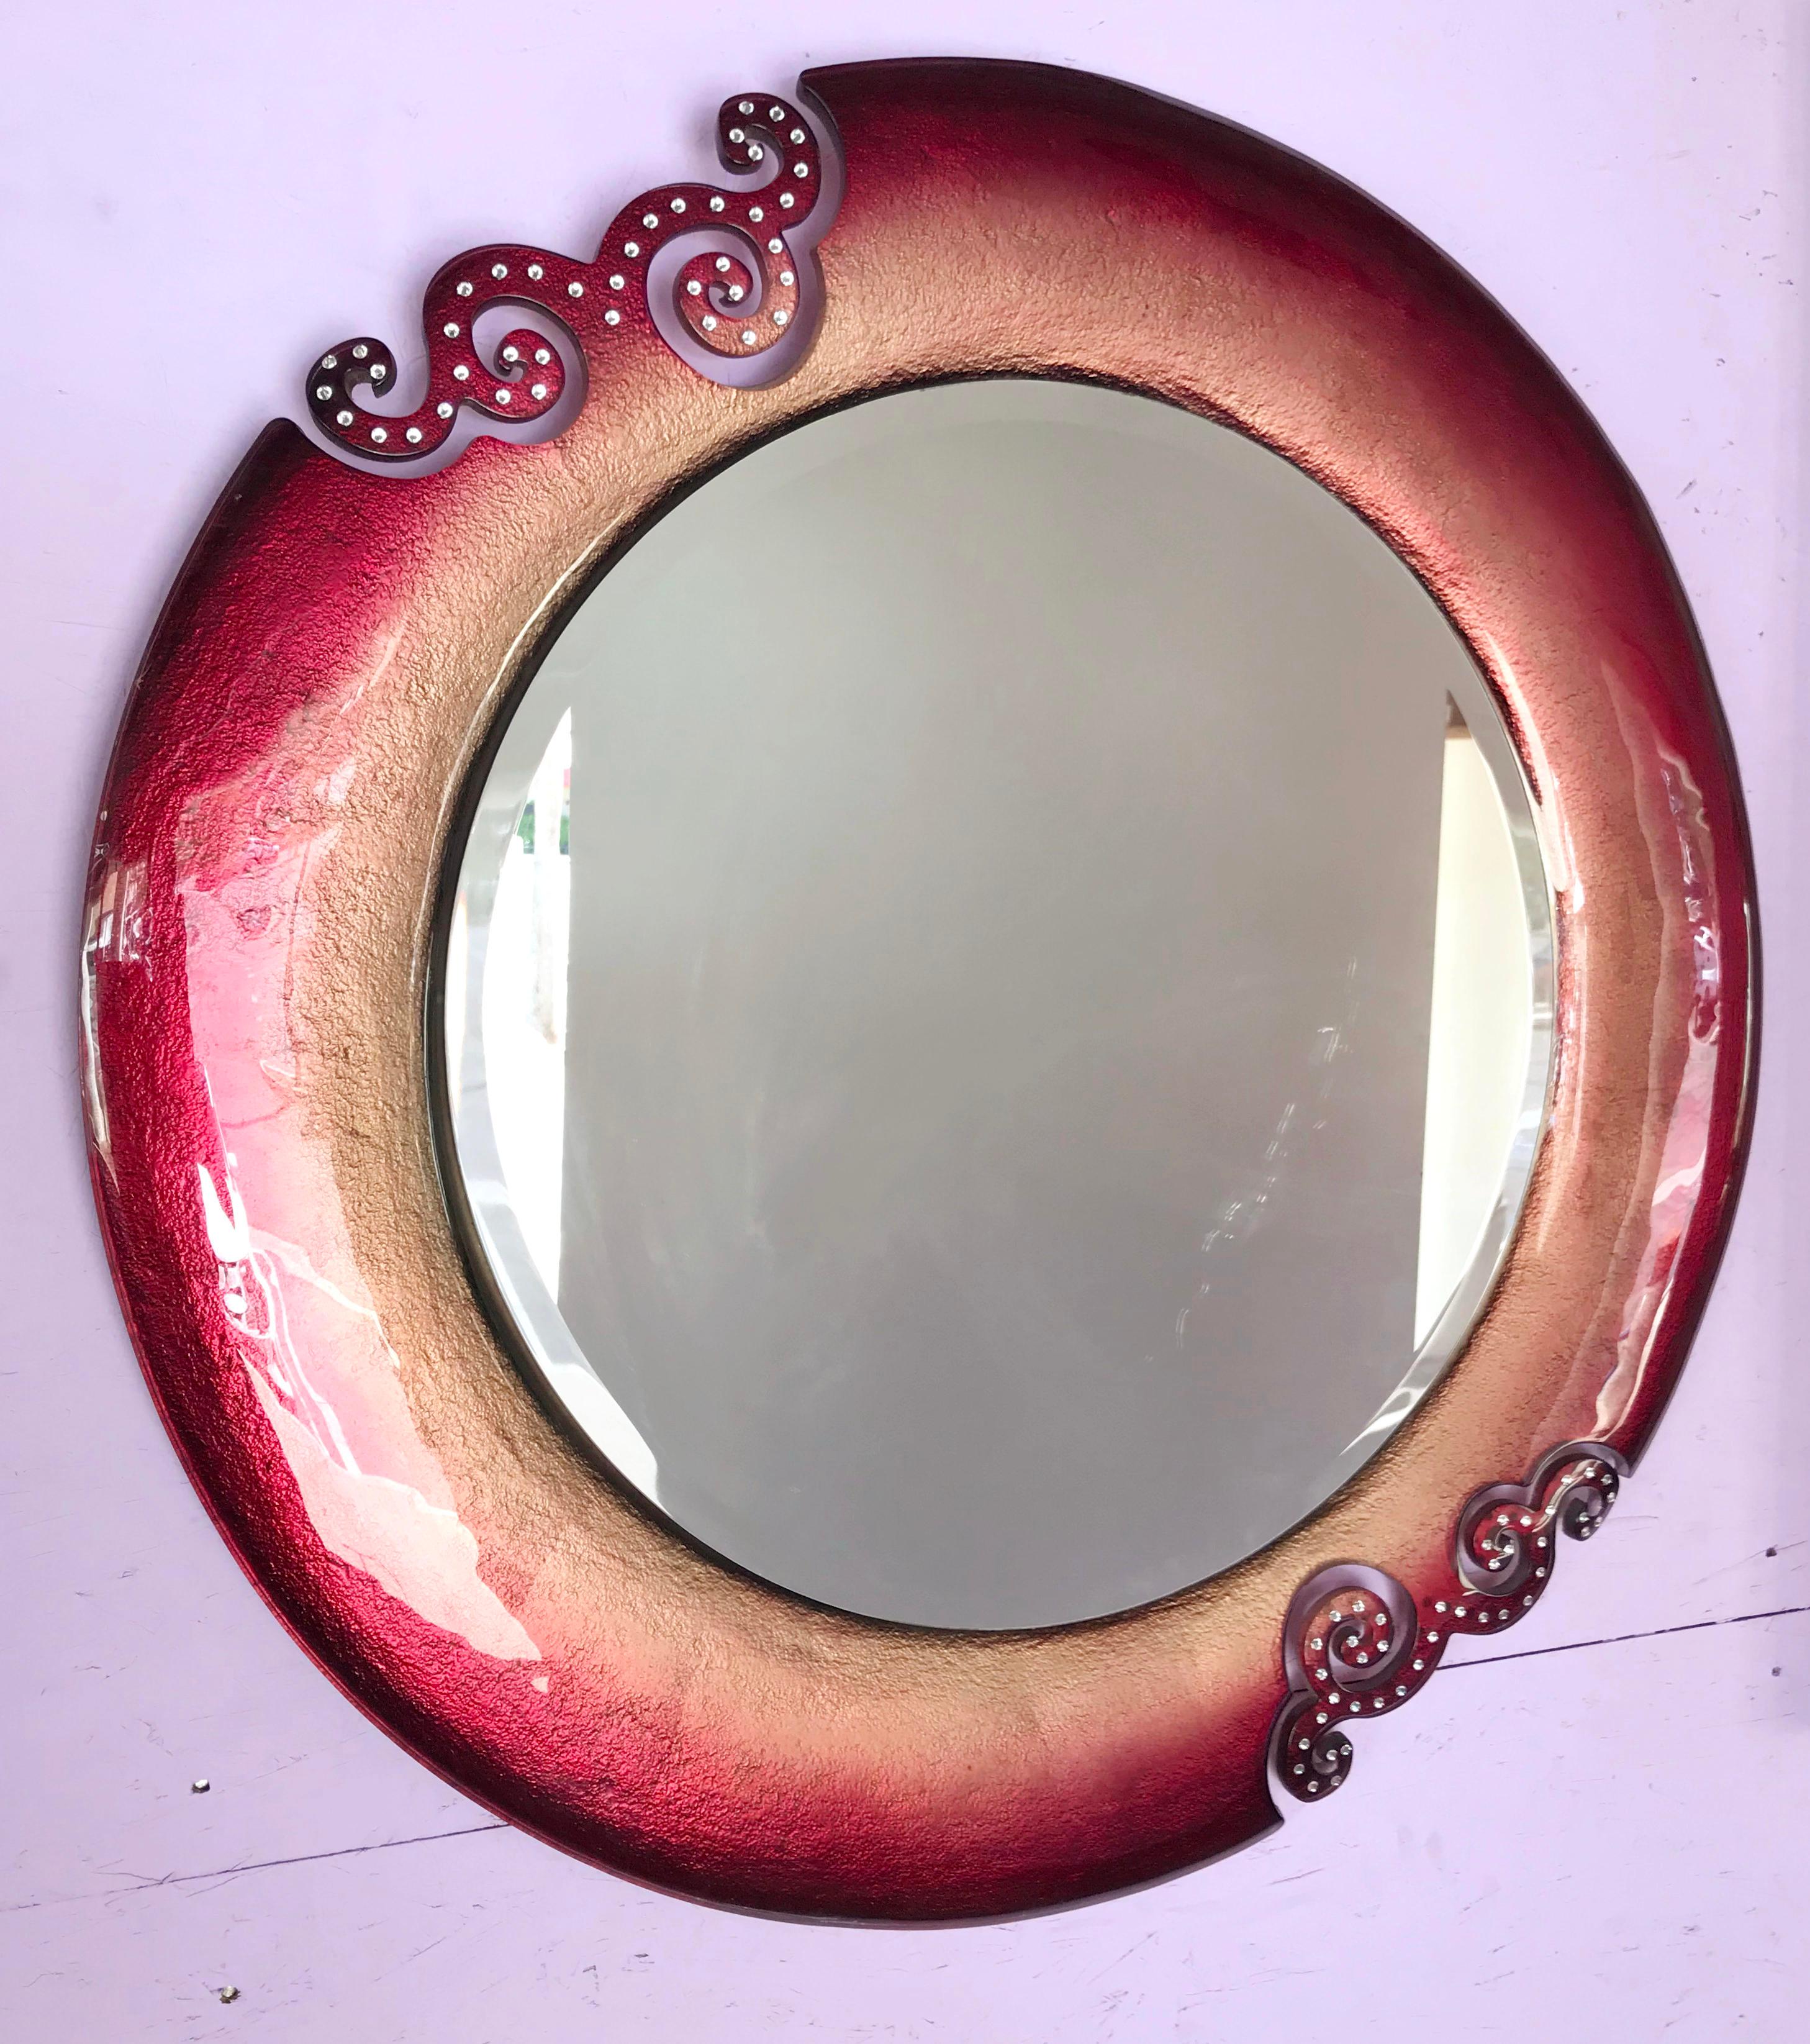 Italian mirror with round gold and Fuchsia glass decorated with Swarovski Strass crystals / Made in Italy circa 1980's
Diameter: 38.5 inches / Depth: 1 inch
1 in stock in Palm Springs currently ON FINAL CLEARANCE SALE for $899 !!
Order Reference #: